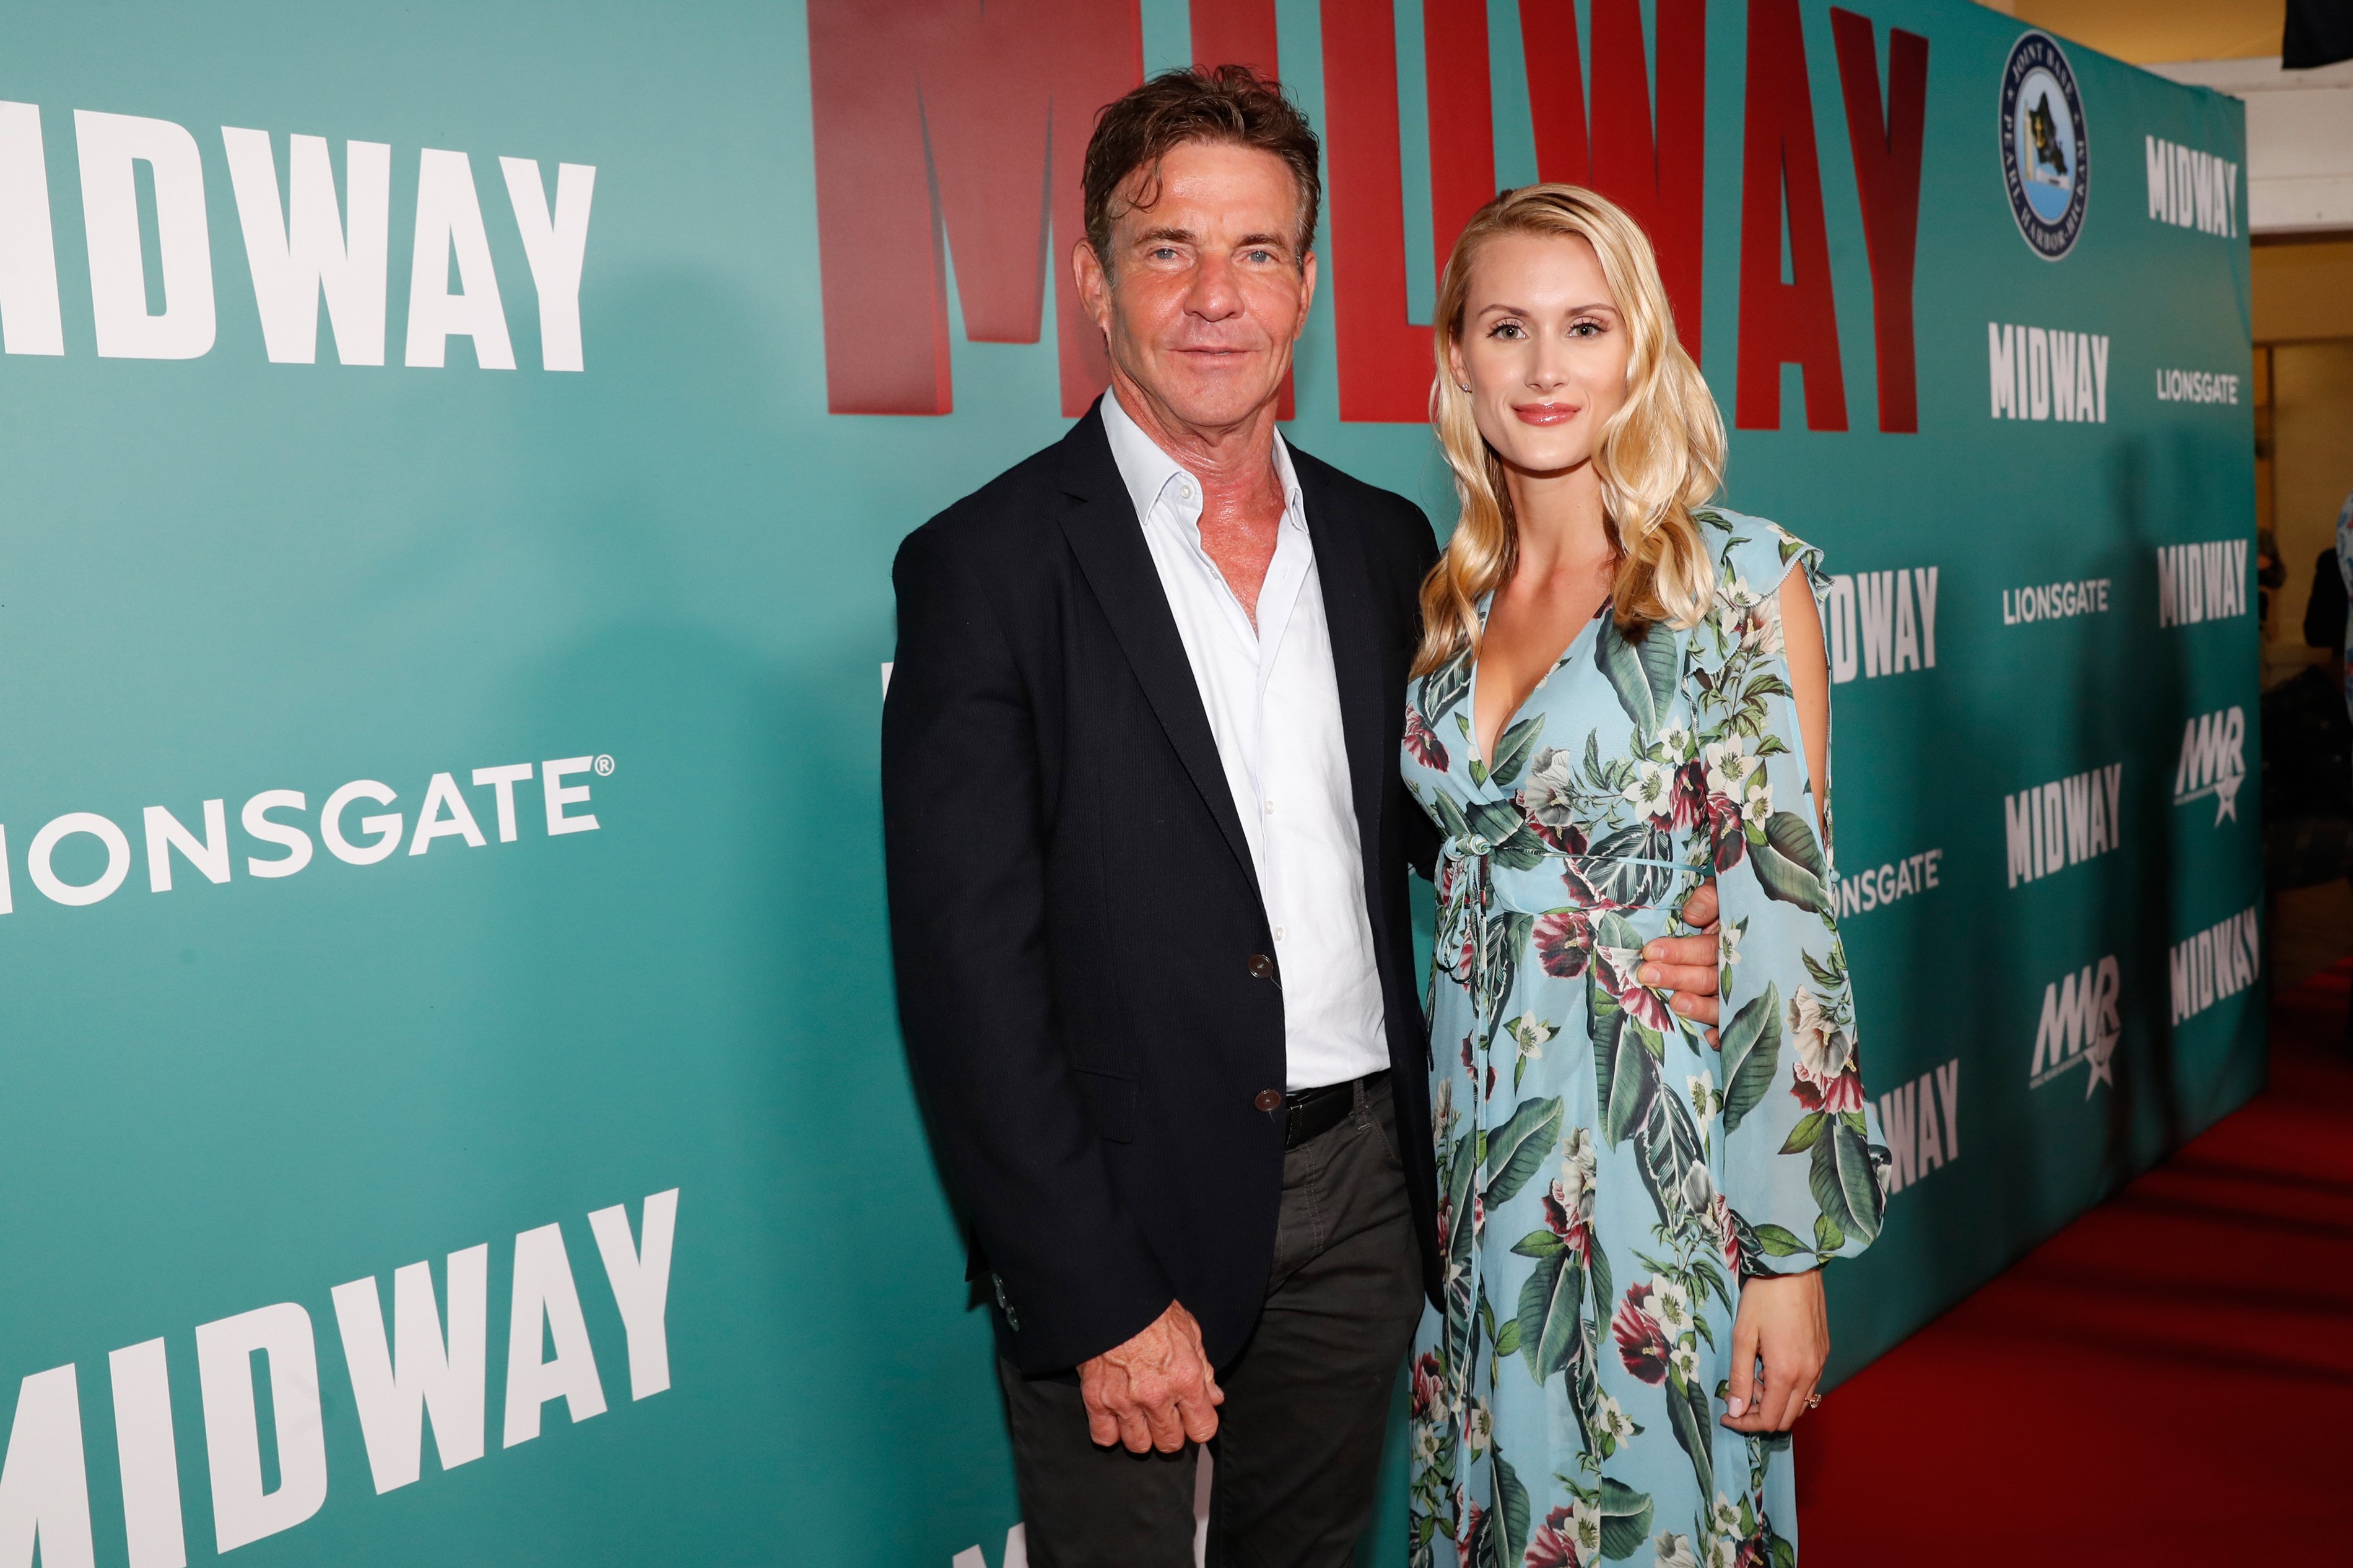 Dennis Quaid and fiancee Laura Savoid attend the screening of "Midway" in Honolulu, Hawaii on October 20, 2019 | Photo: Getty Images